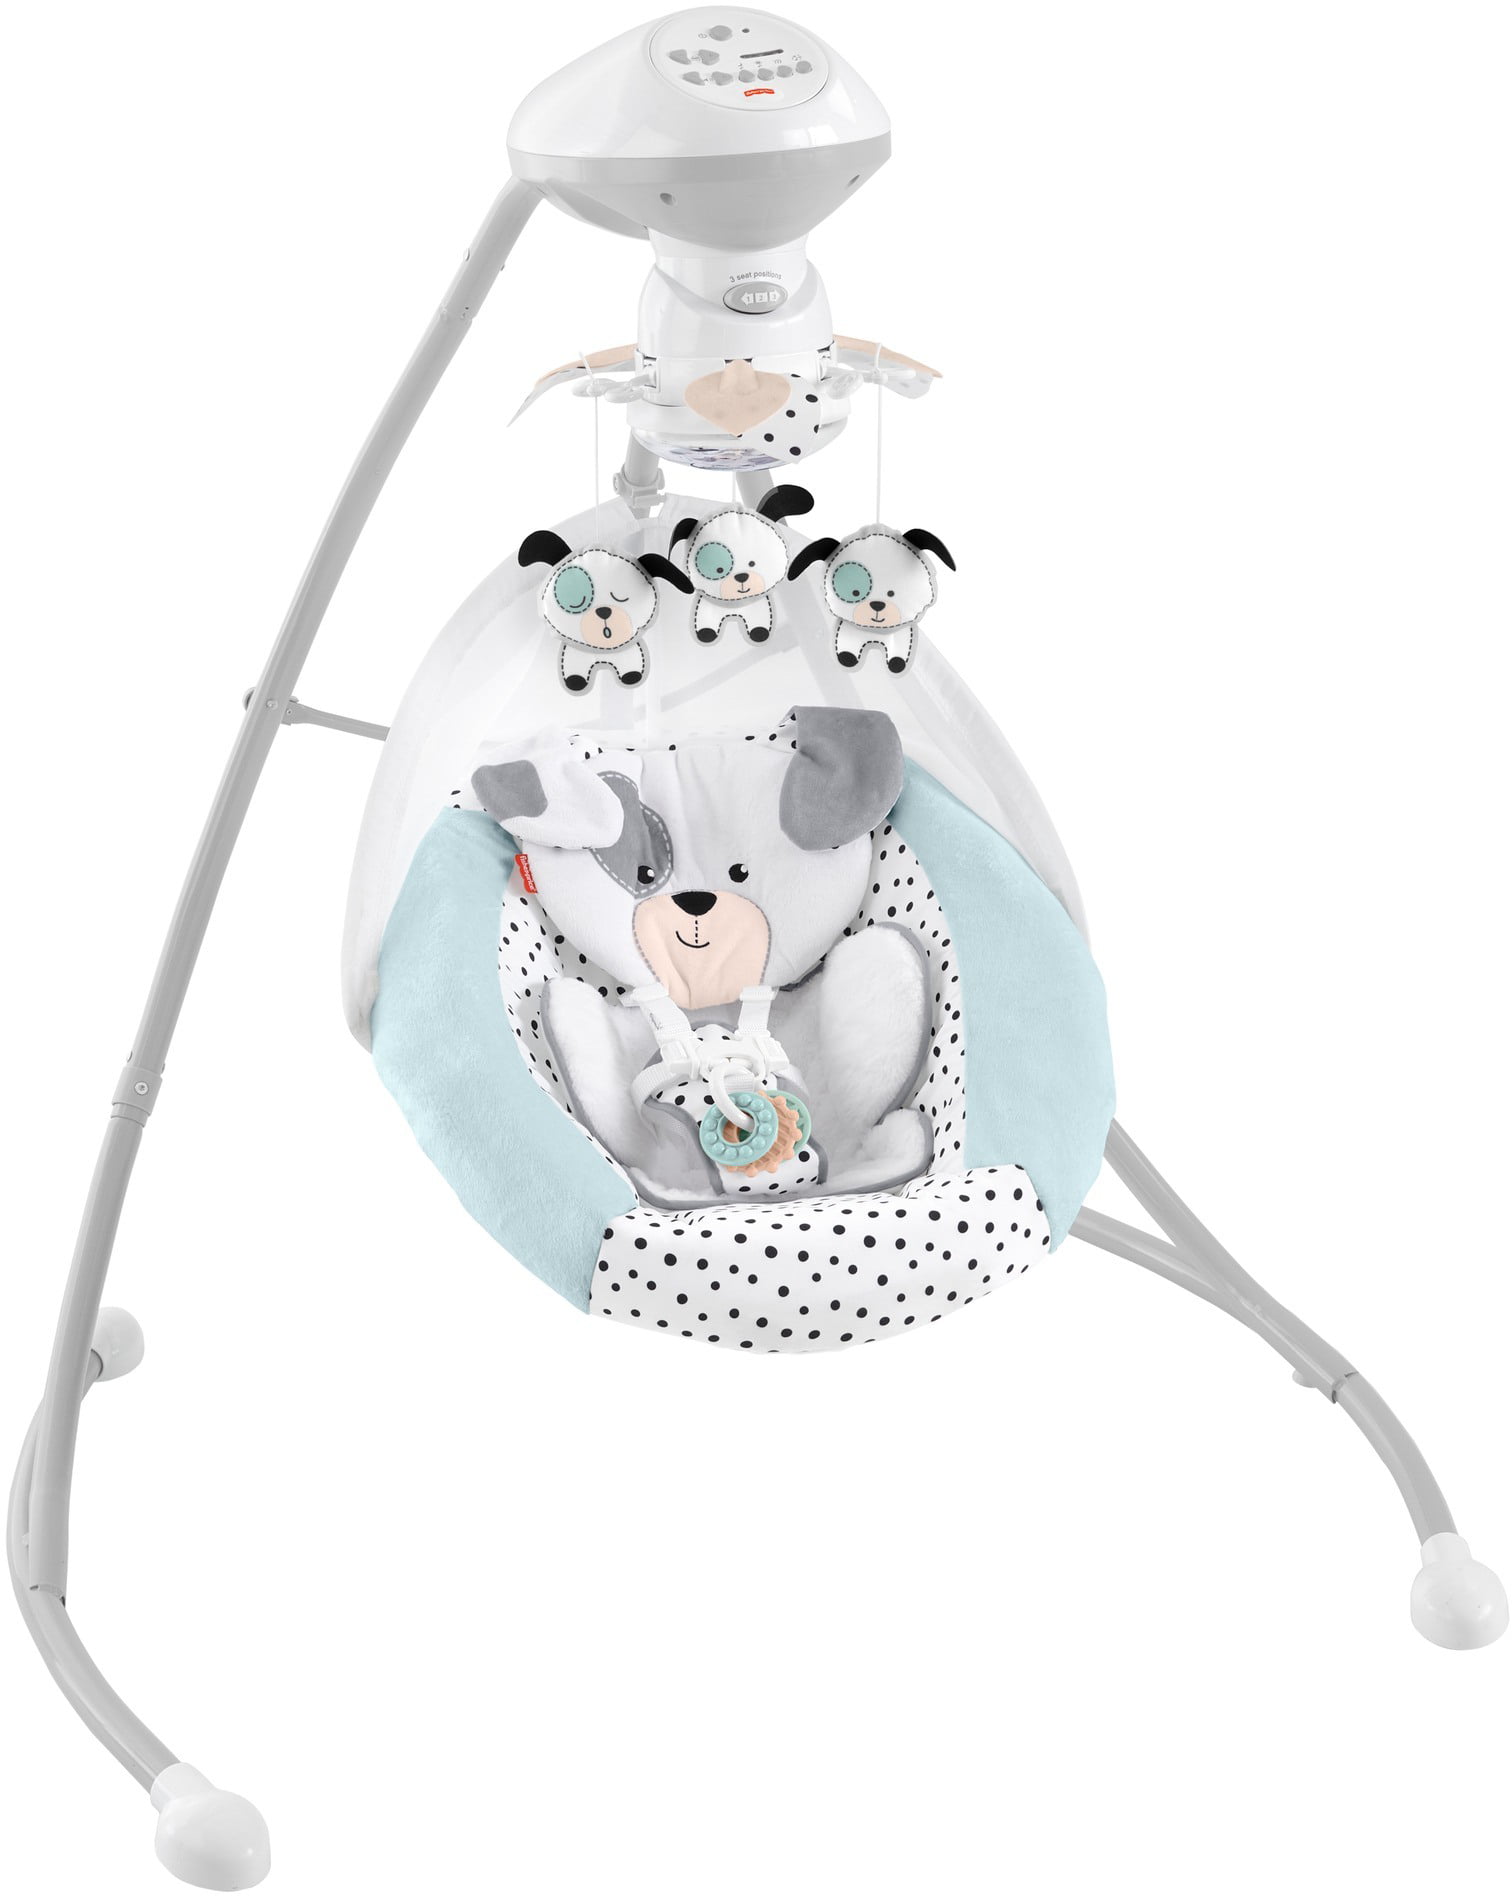 FisherPrice Dots and Spots Puppy Cradle 'N Swing, Baby